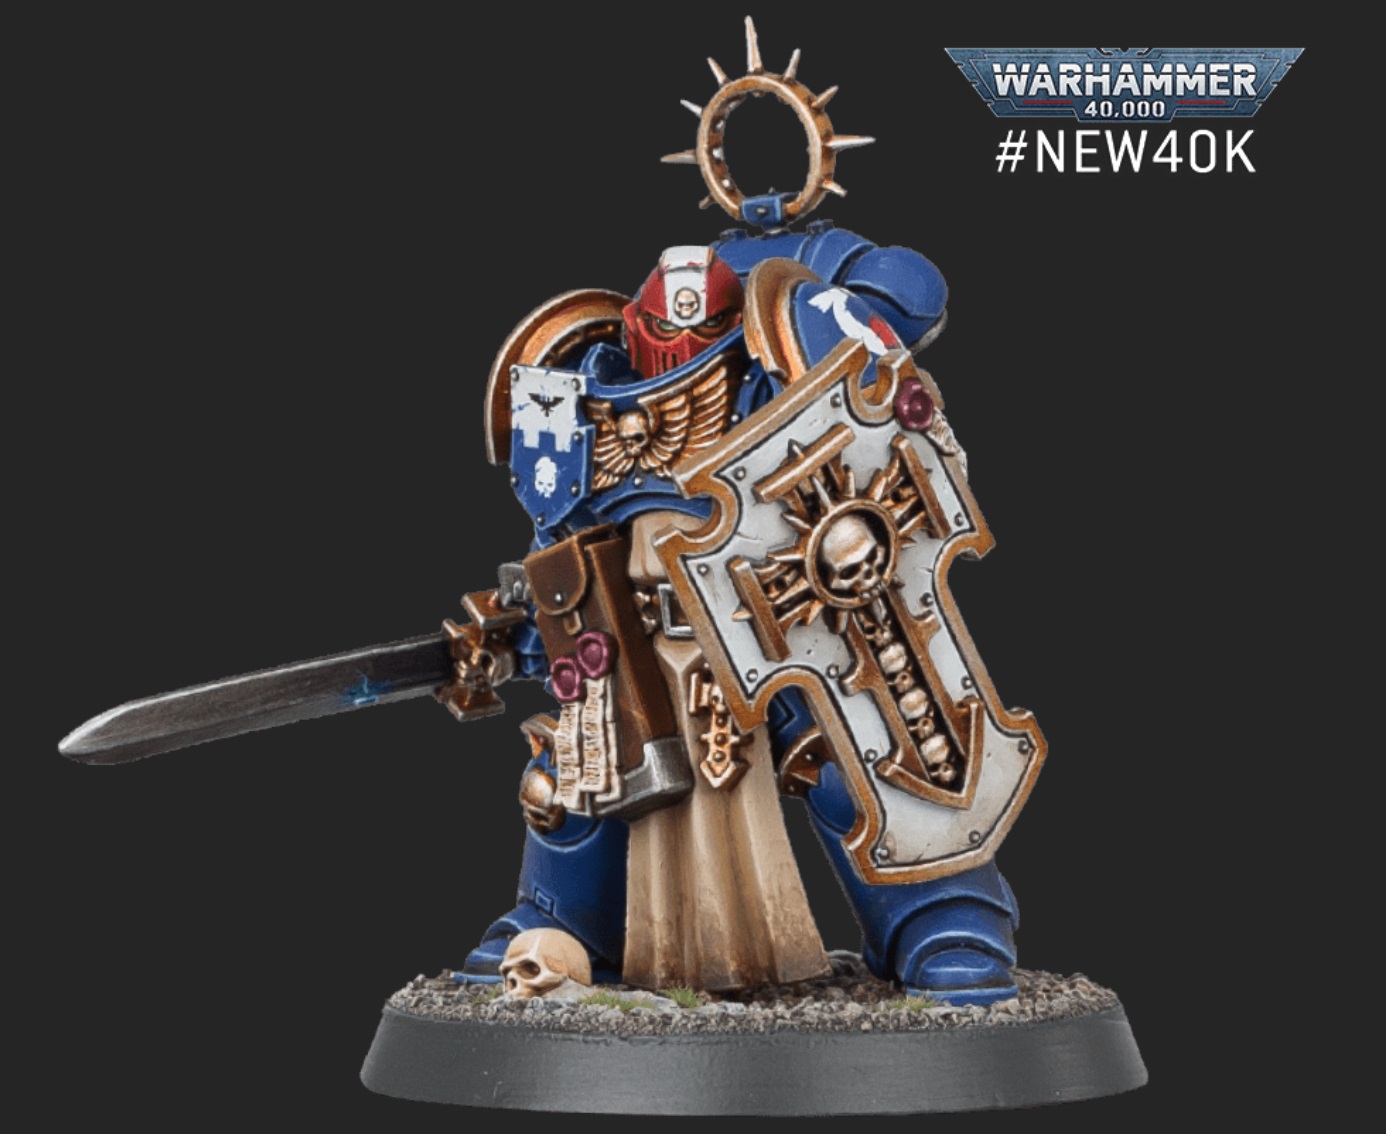 Warhammer 40K BREAKING: New Space Marine Models Unveiled - Bell of Lost